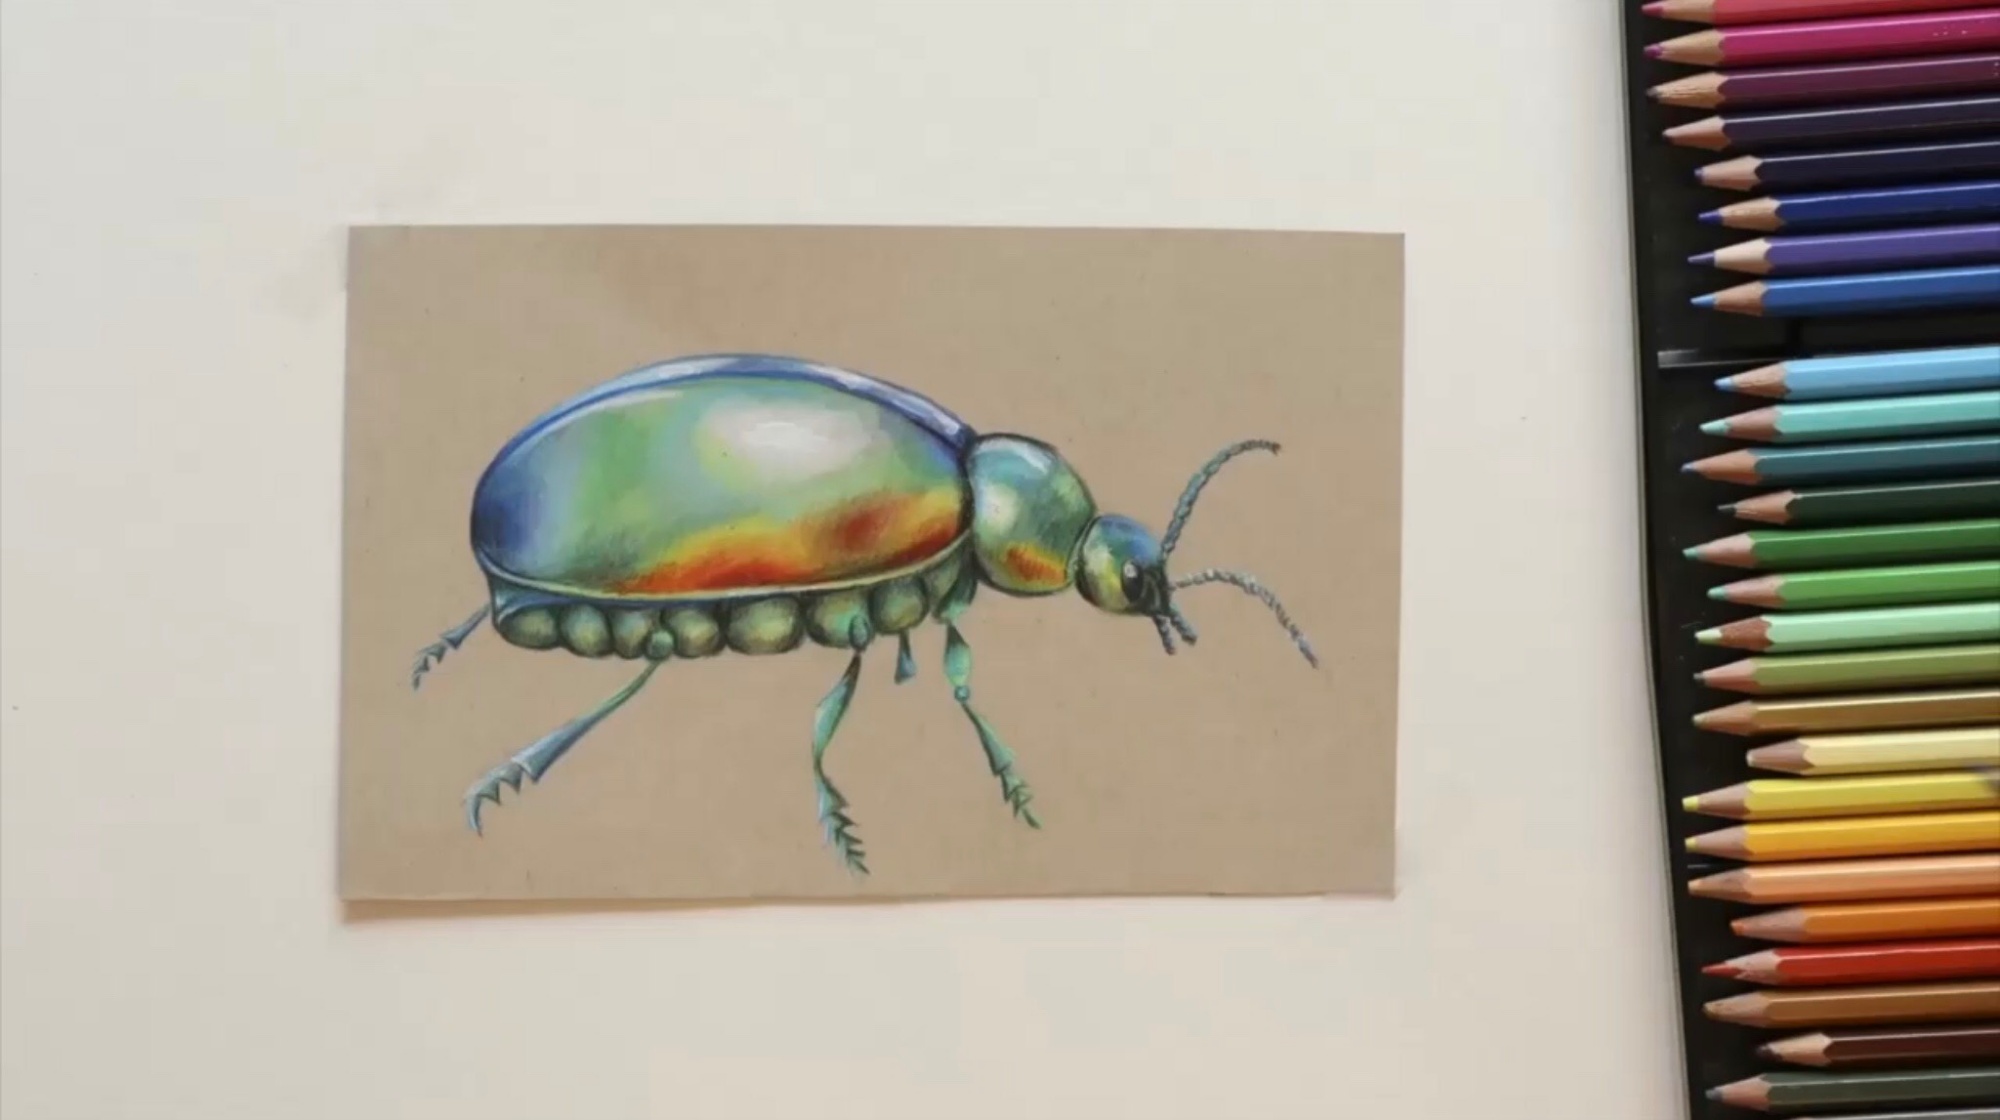 Lily's drawing of the Tansy Beetle